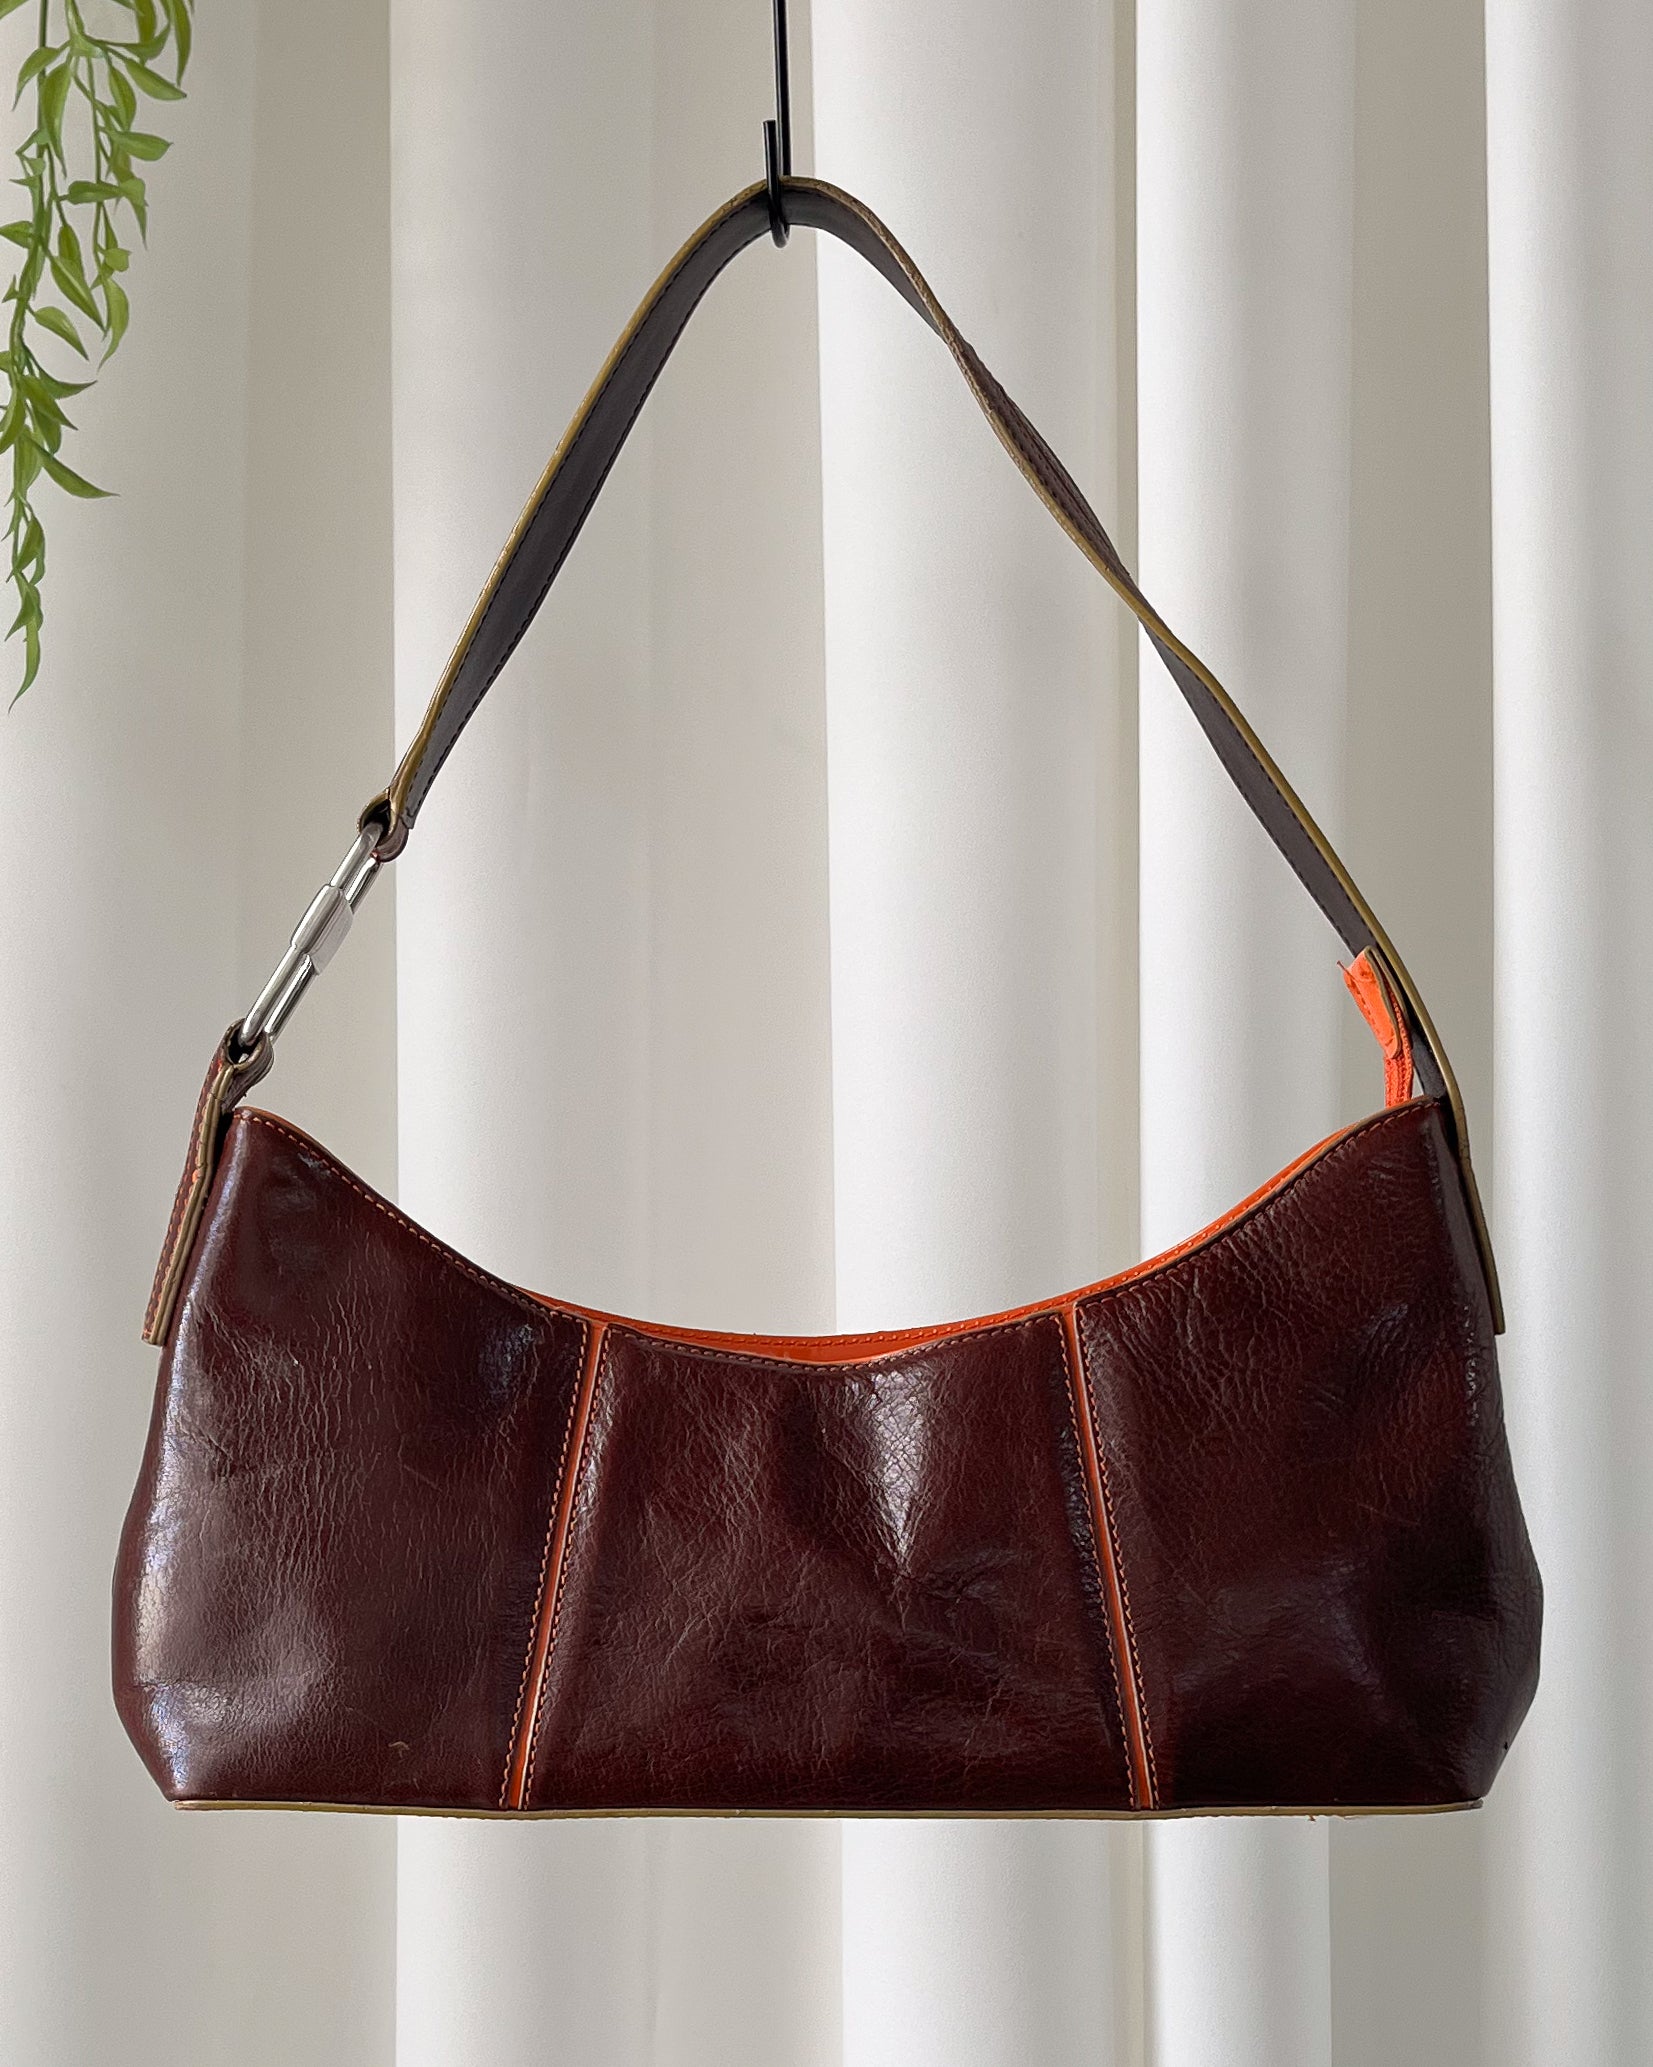 Michael Kors Brown Soft Leather Shoulder Bag – All That She Wants Boutique